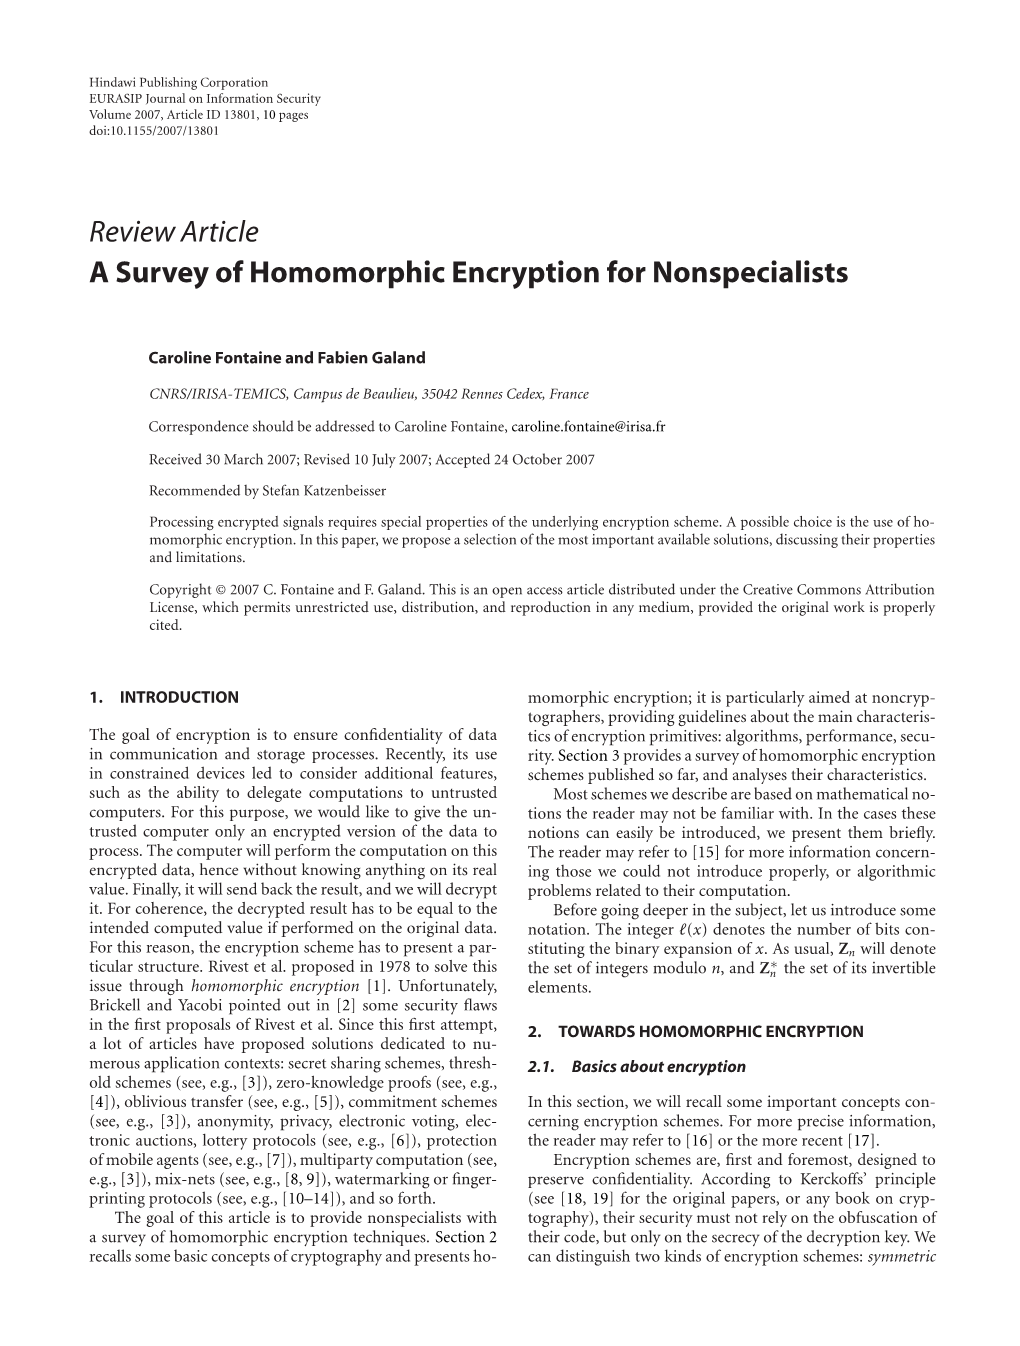 A Survey of Homomorphic Encryption for Nonspecialists